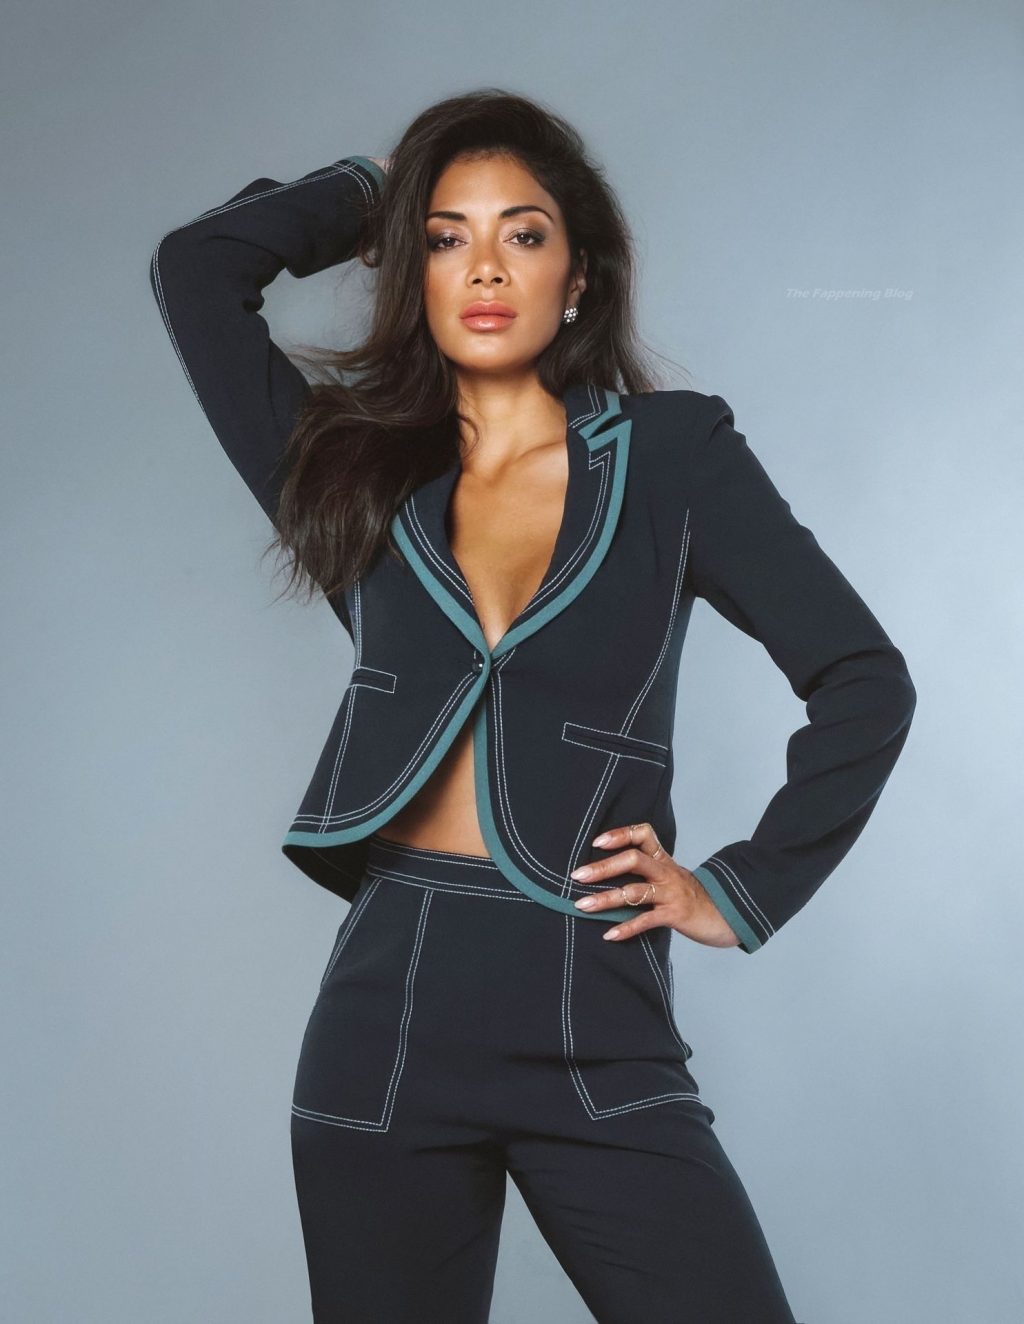 Nicole Scherzinger Looks Glamorous in a Suit as She Poses For a Shoot (7 Photos)